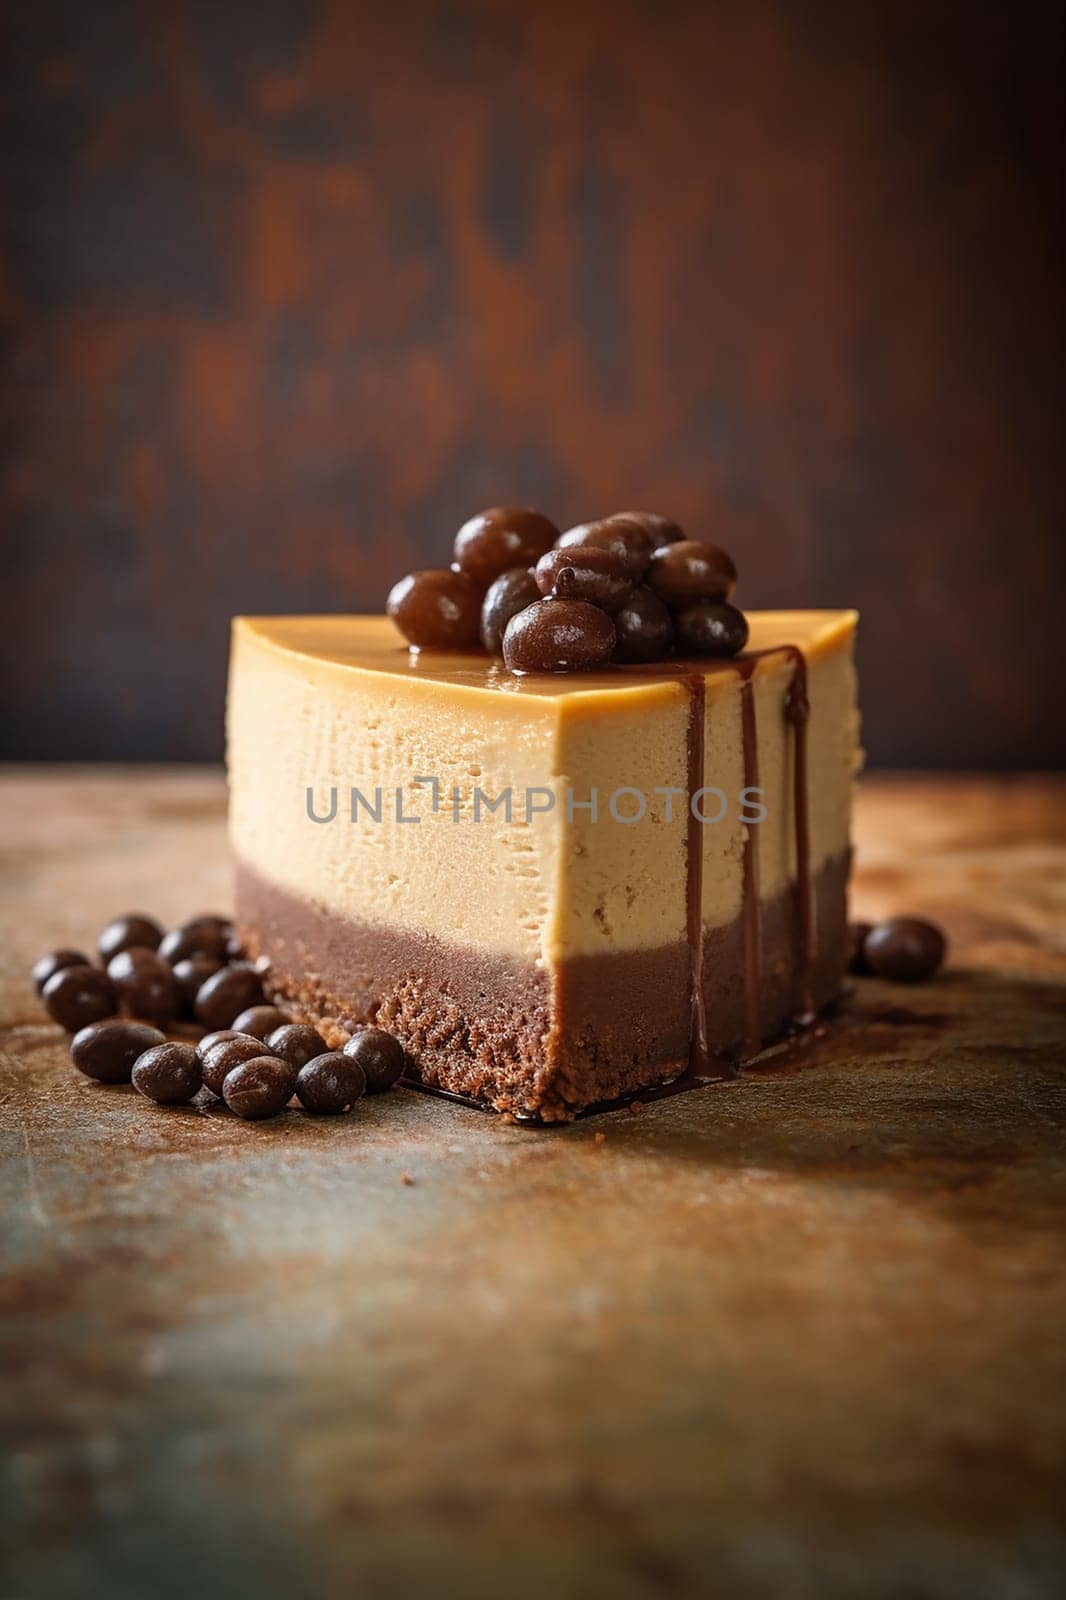 A delectable layered chocolate and coffee cheesecake adorned with coffee beans. by Hype2art